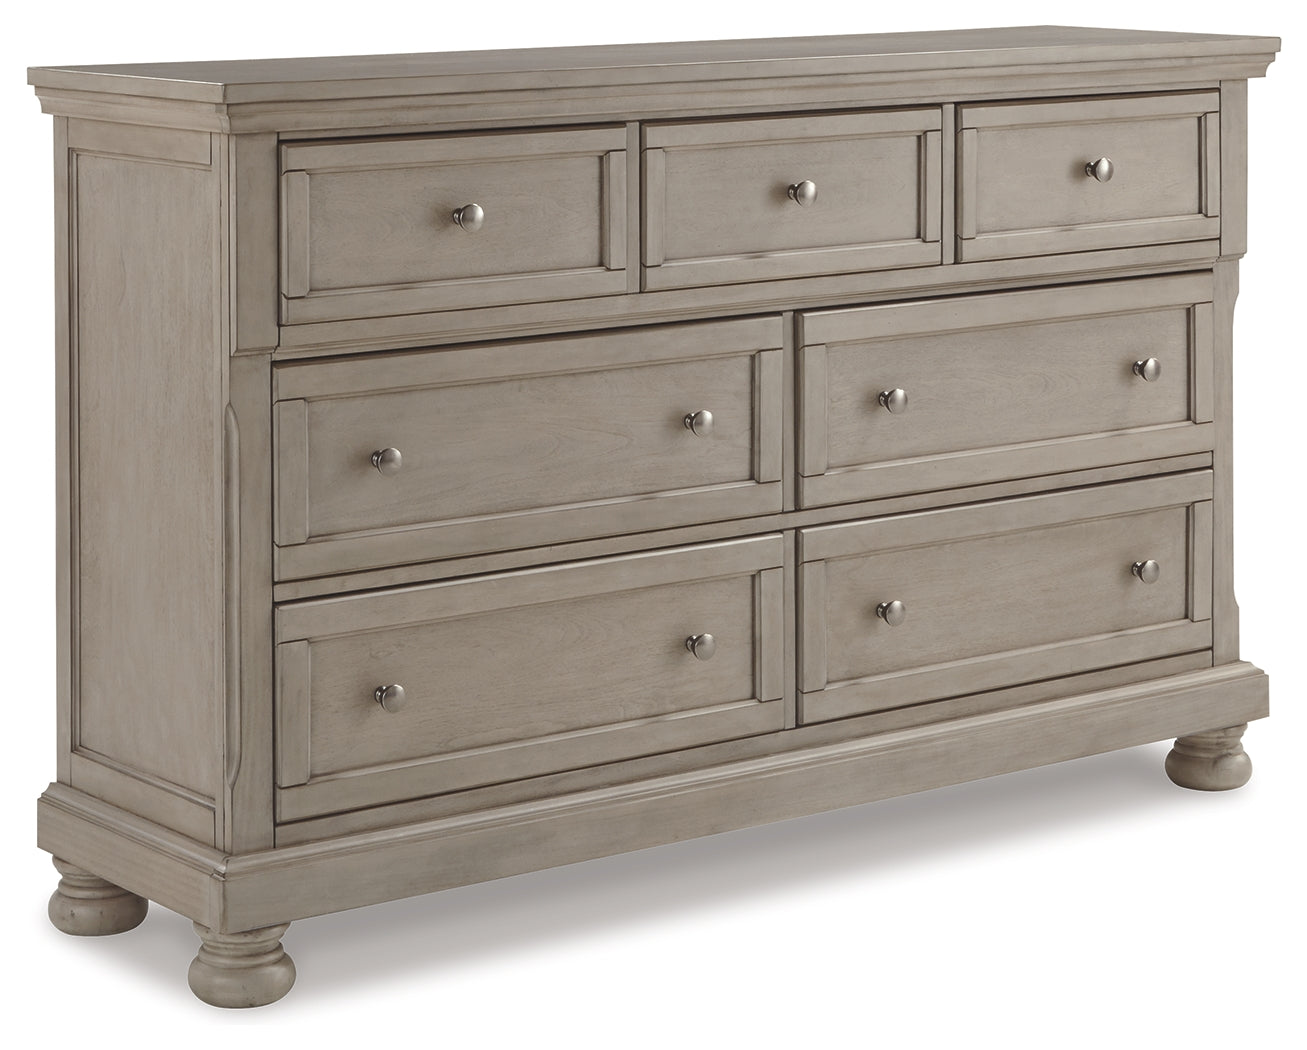 Lettner California King Panel Storage Bedroom Set with Dresser and Nightstand